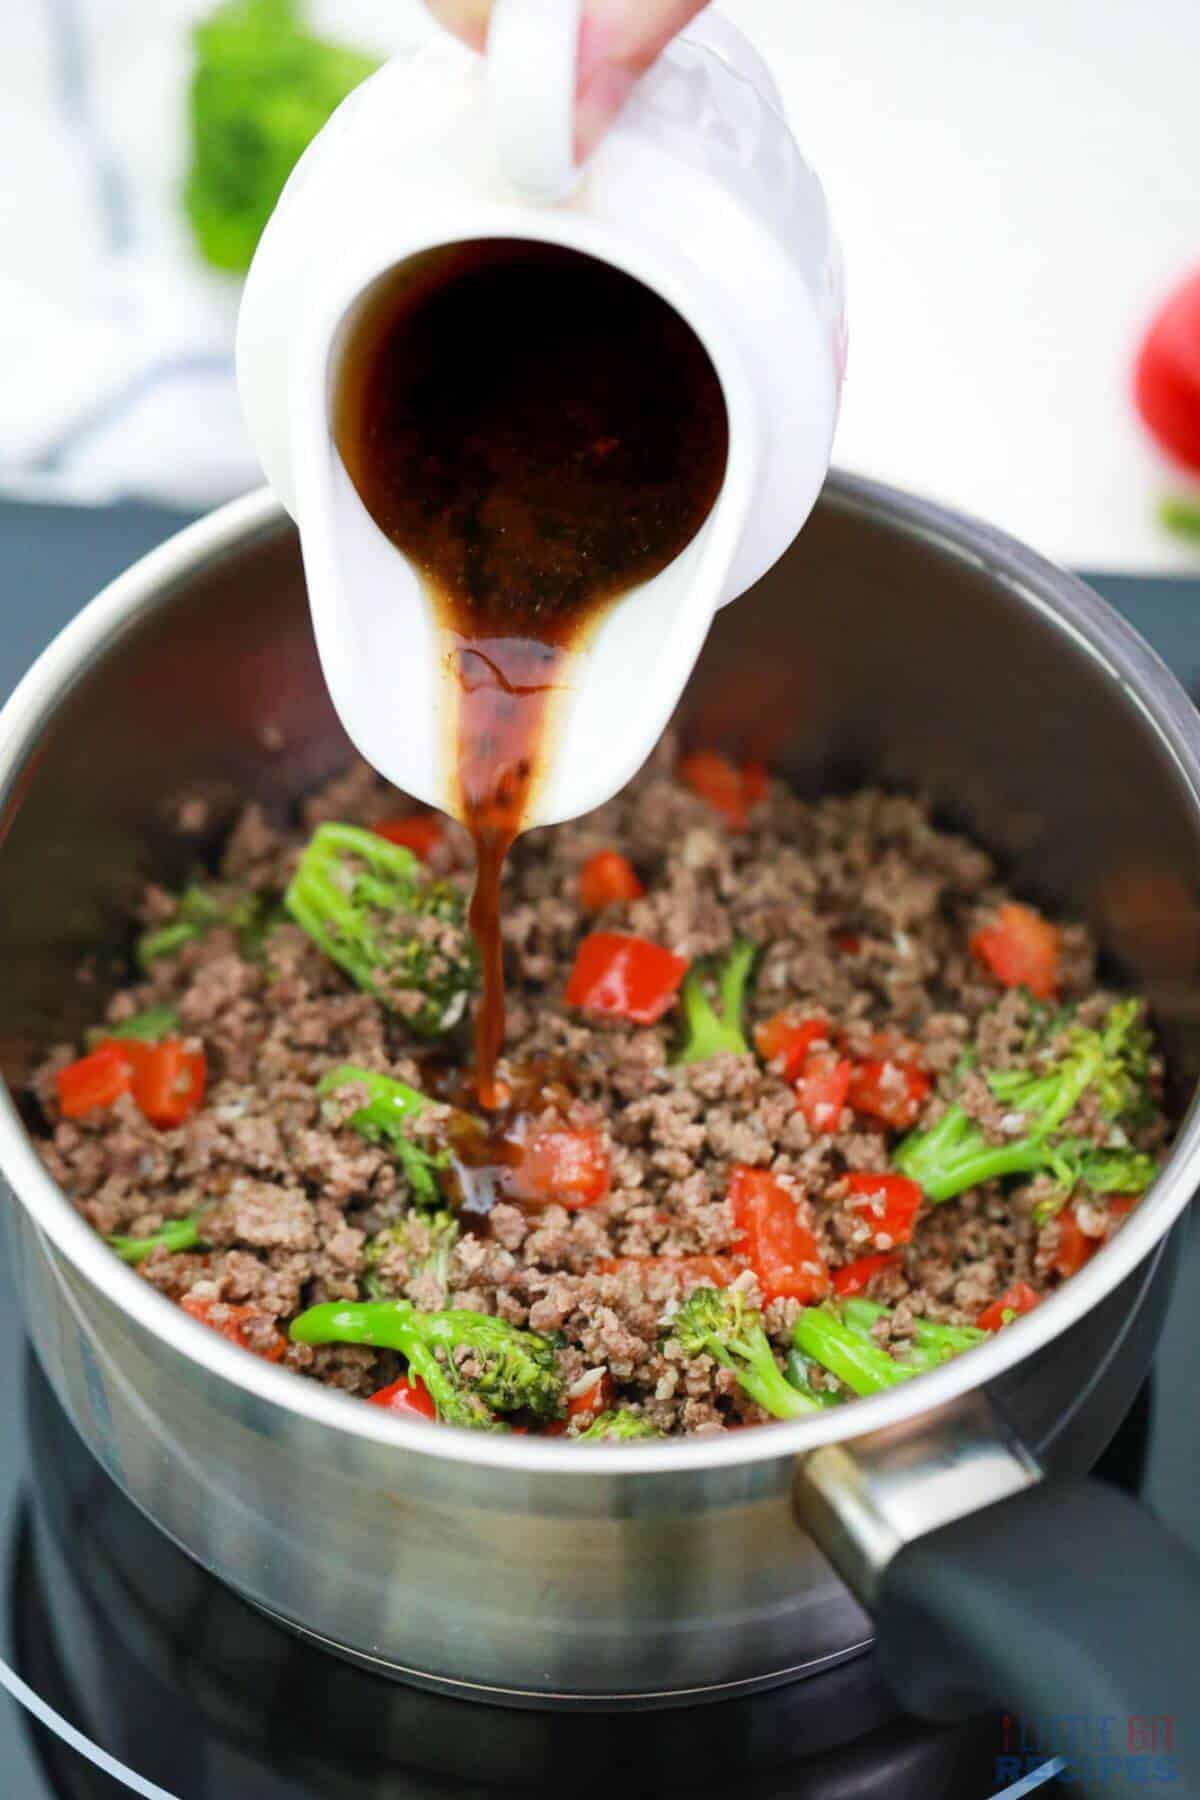 pouring sauce over beef and broccoli mixture in pot.